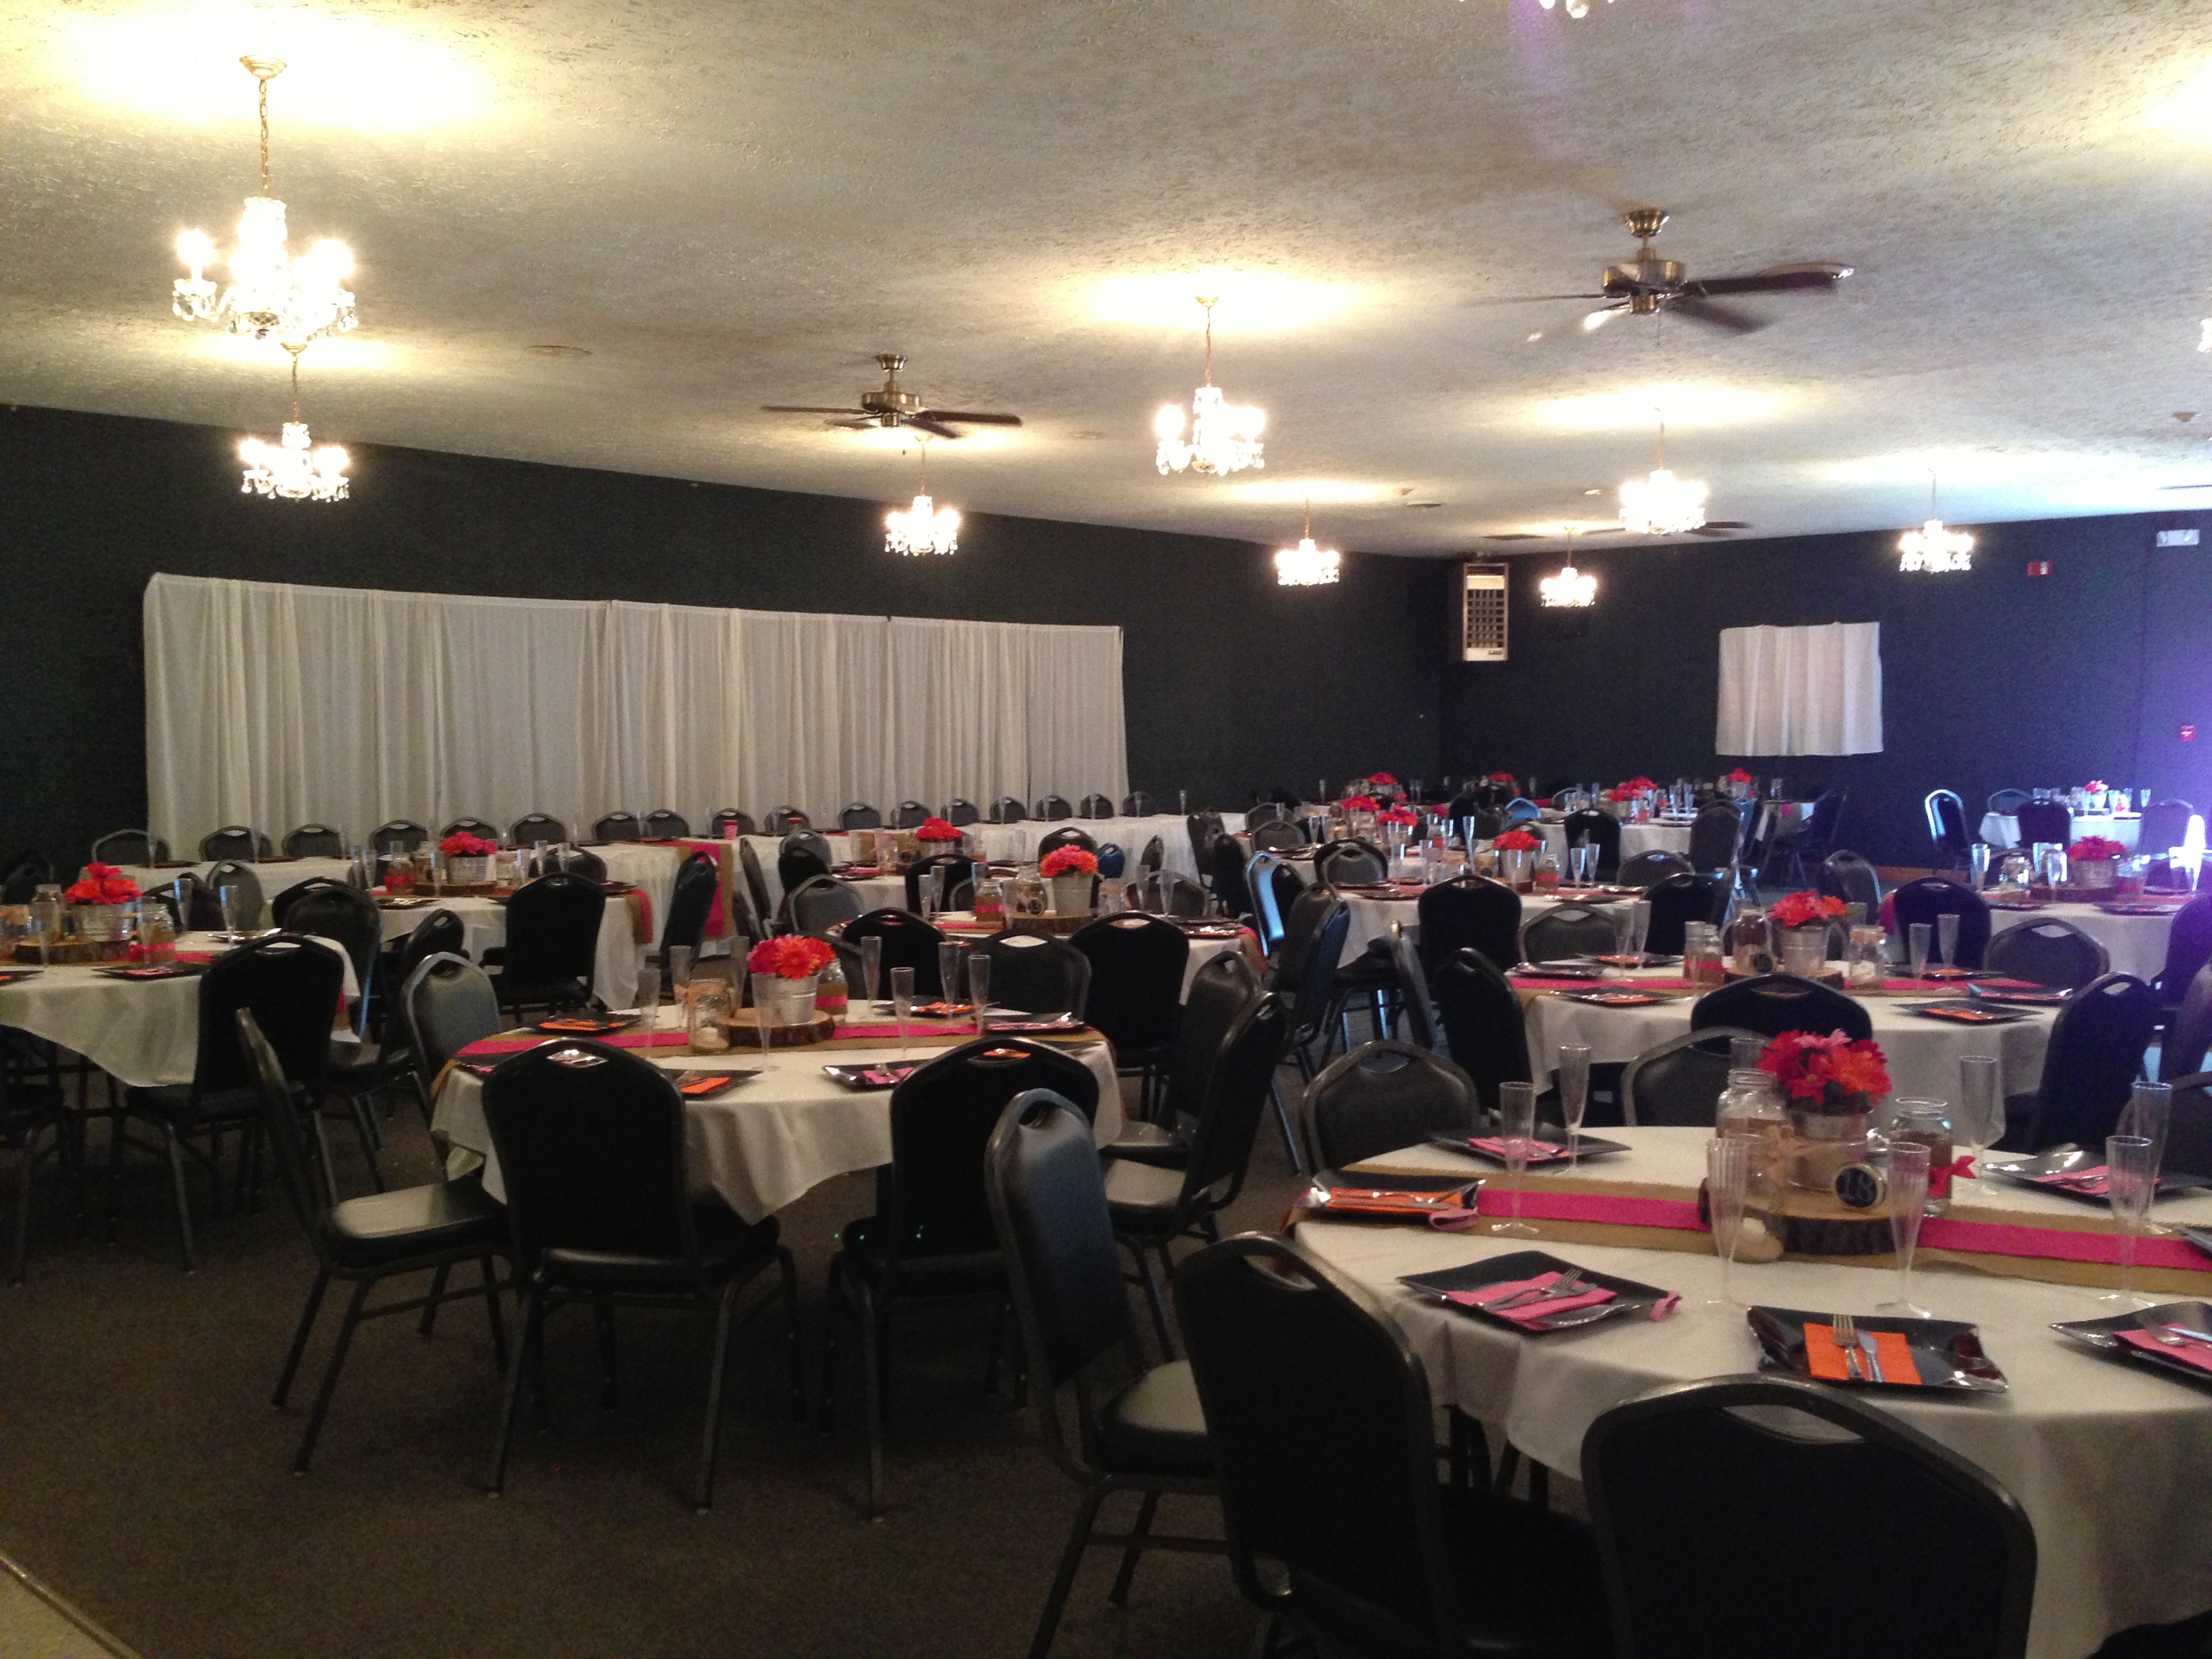 Photo of some of the tables decorated for an event at the clubhouse